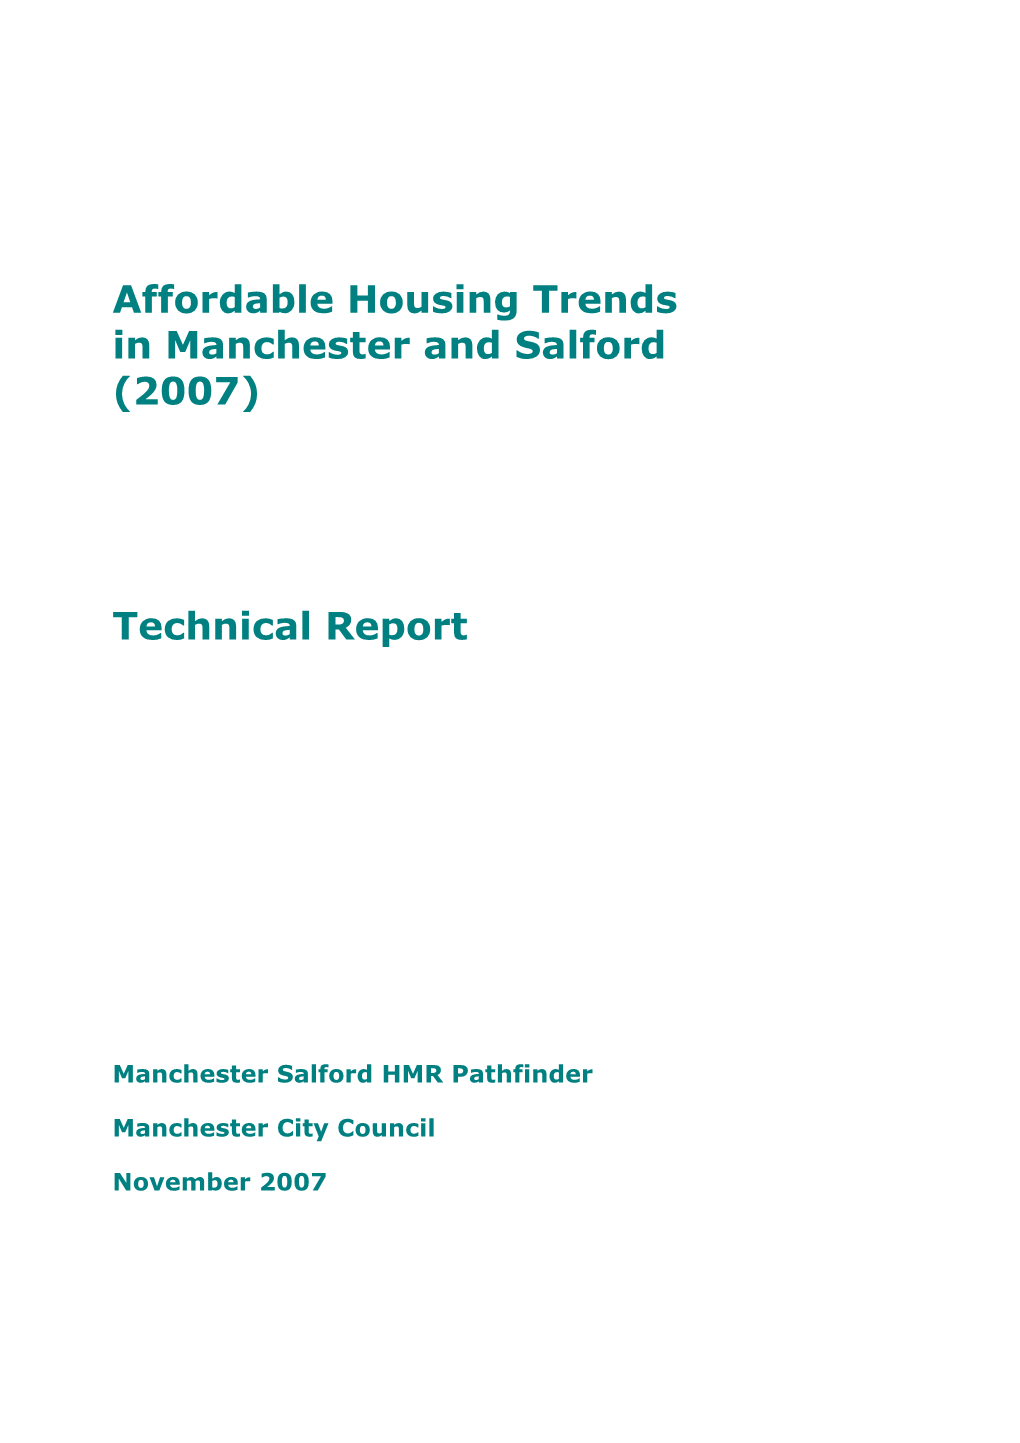 Affordable Housing Trends in Manchester and Salford (2007) Technical Report